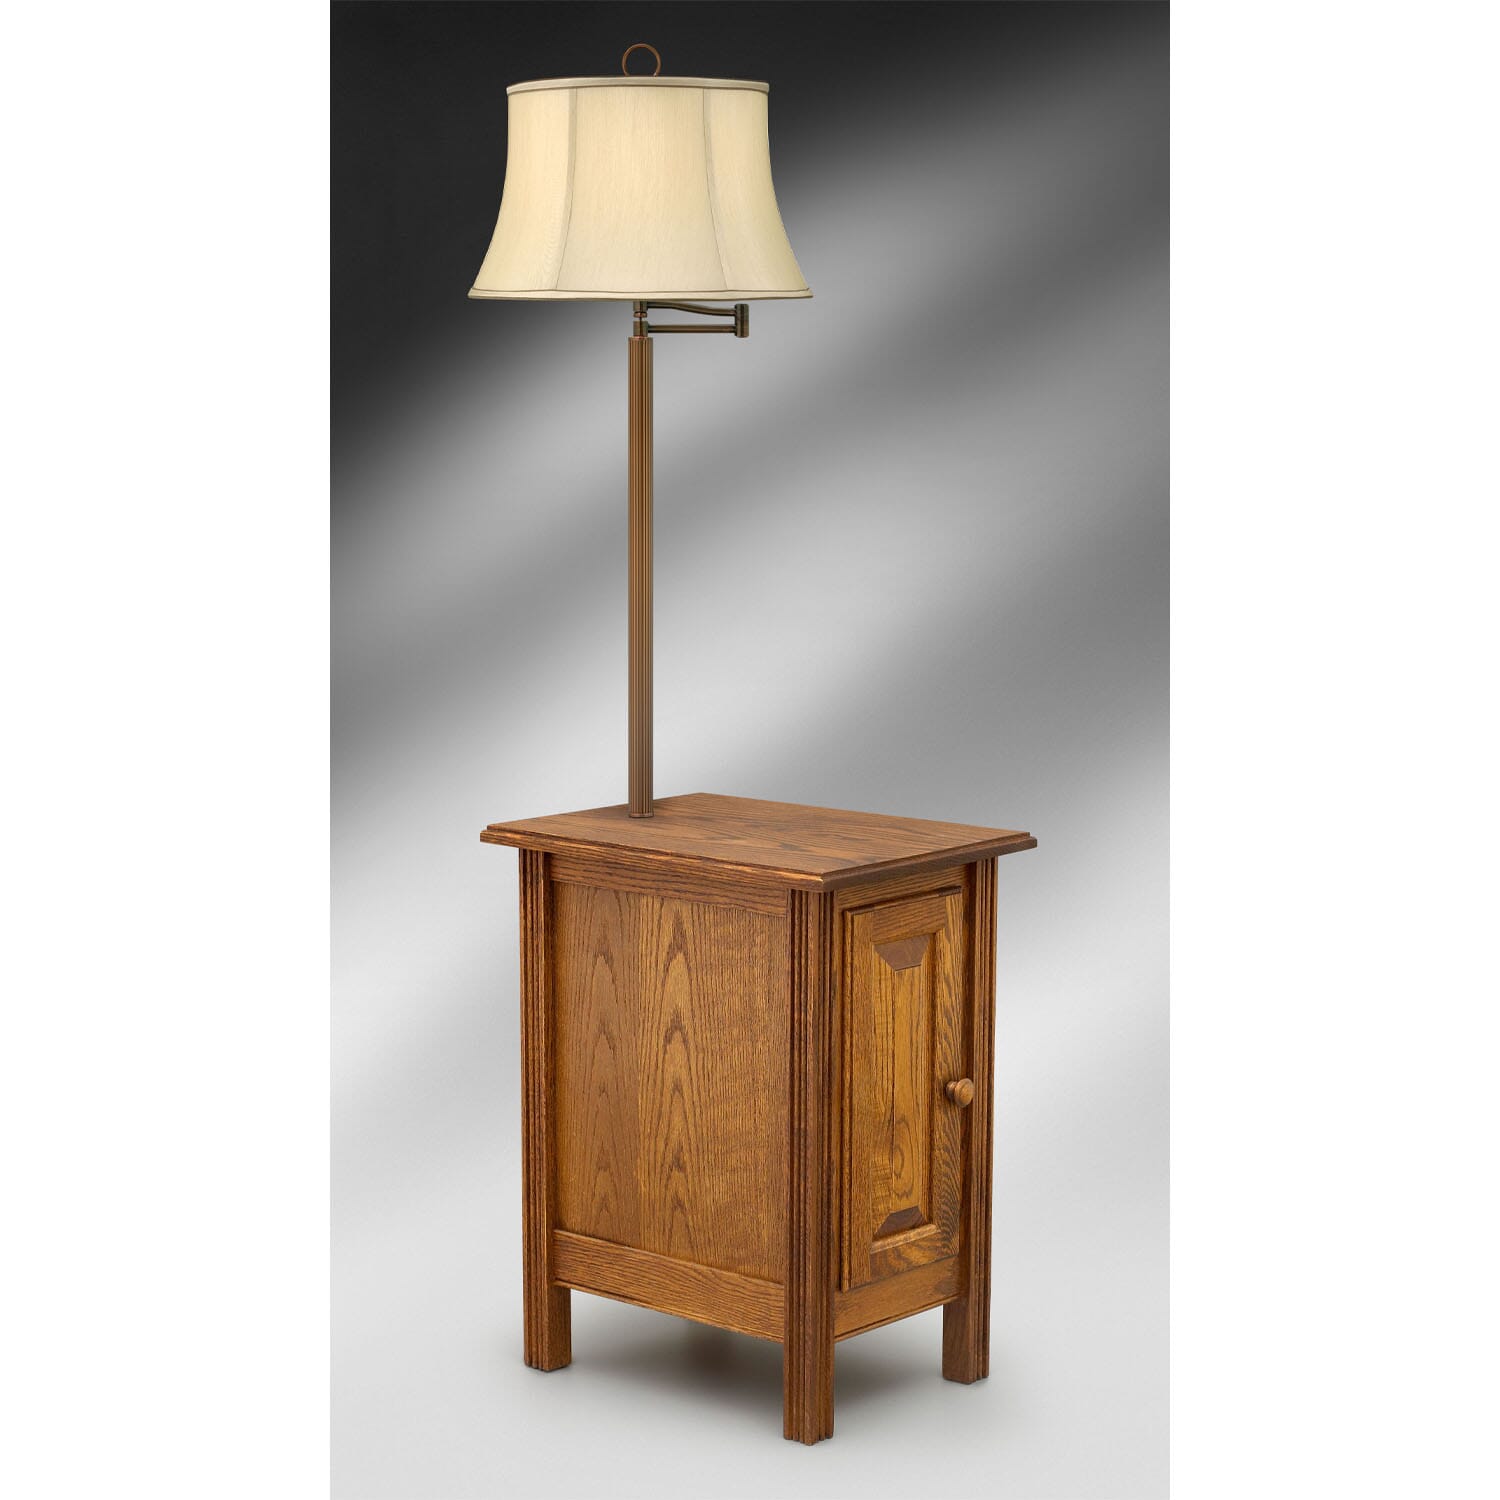 Charm Floor Lamp Lamps Wg R Furniture, Table Lamp With Table Attached